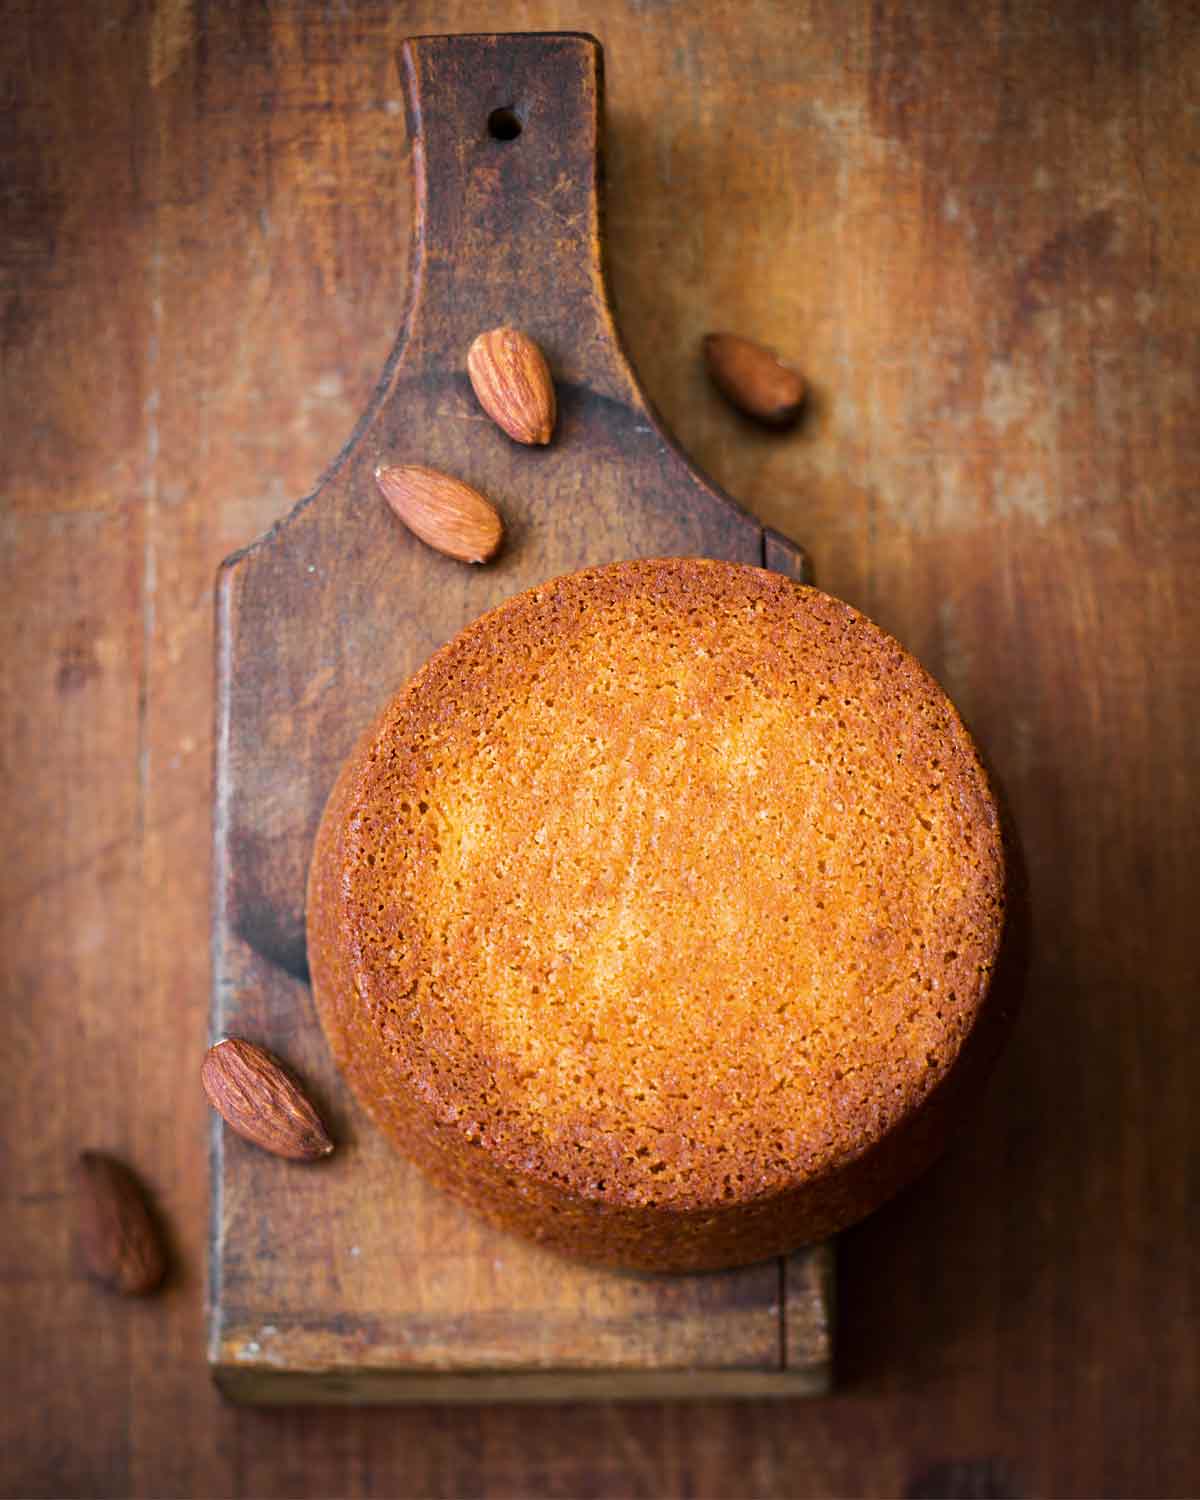 A flourless almond cake on a wooden cutting board with some almonds scattered around it.